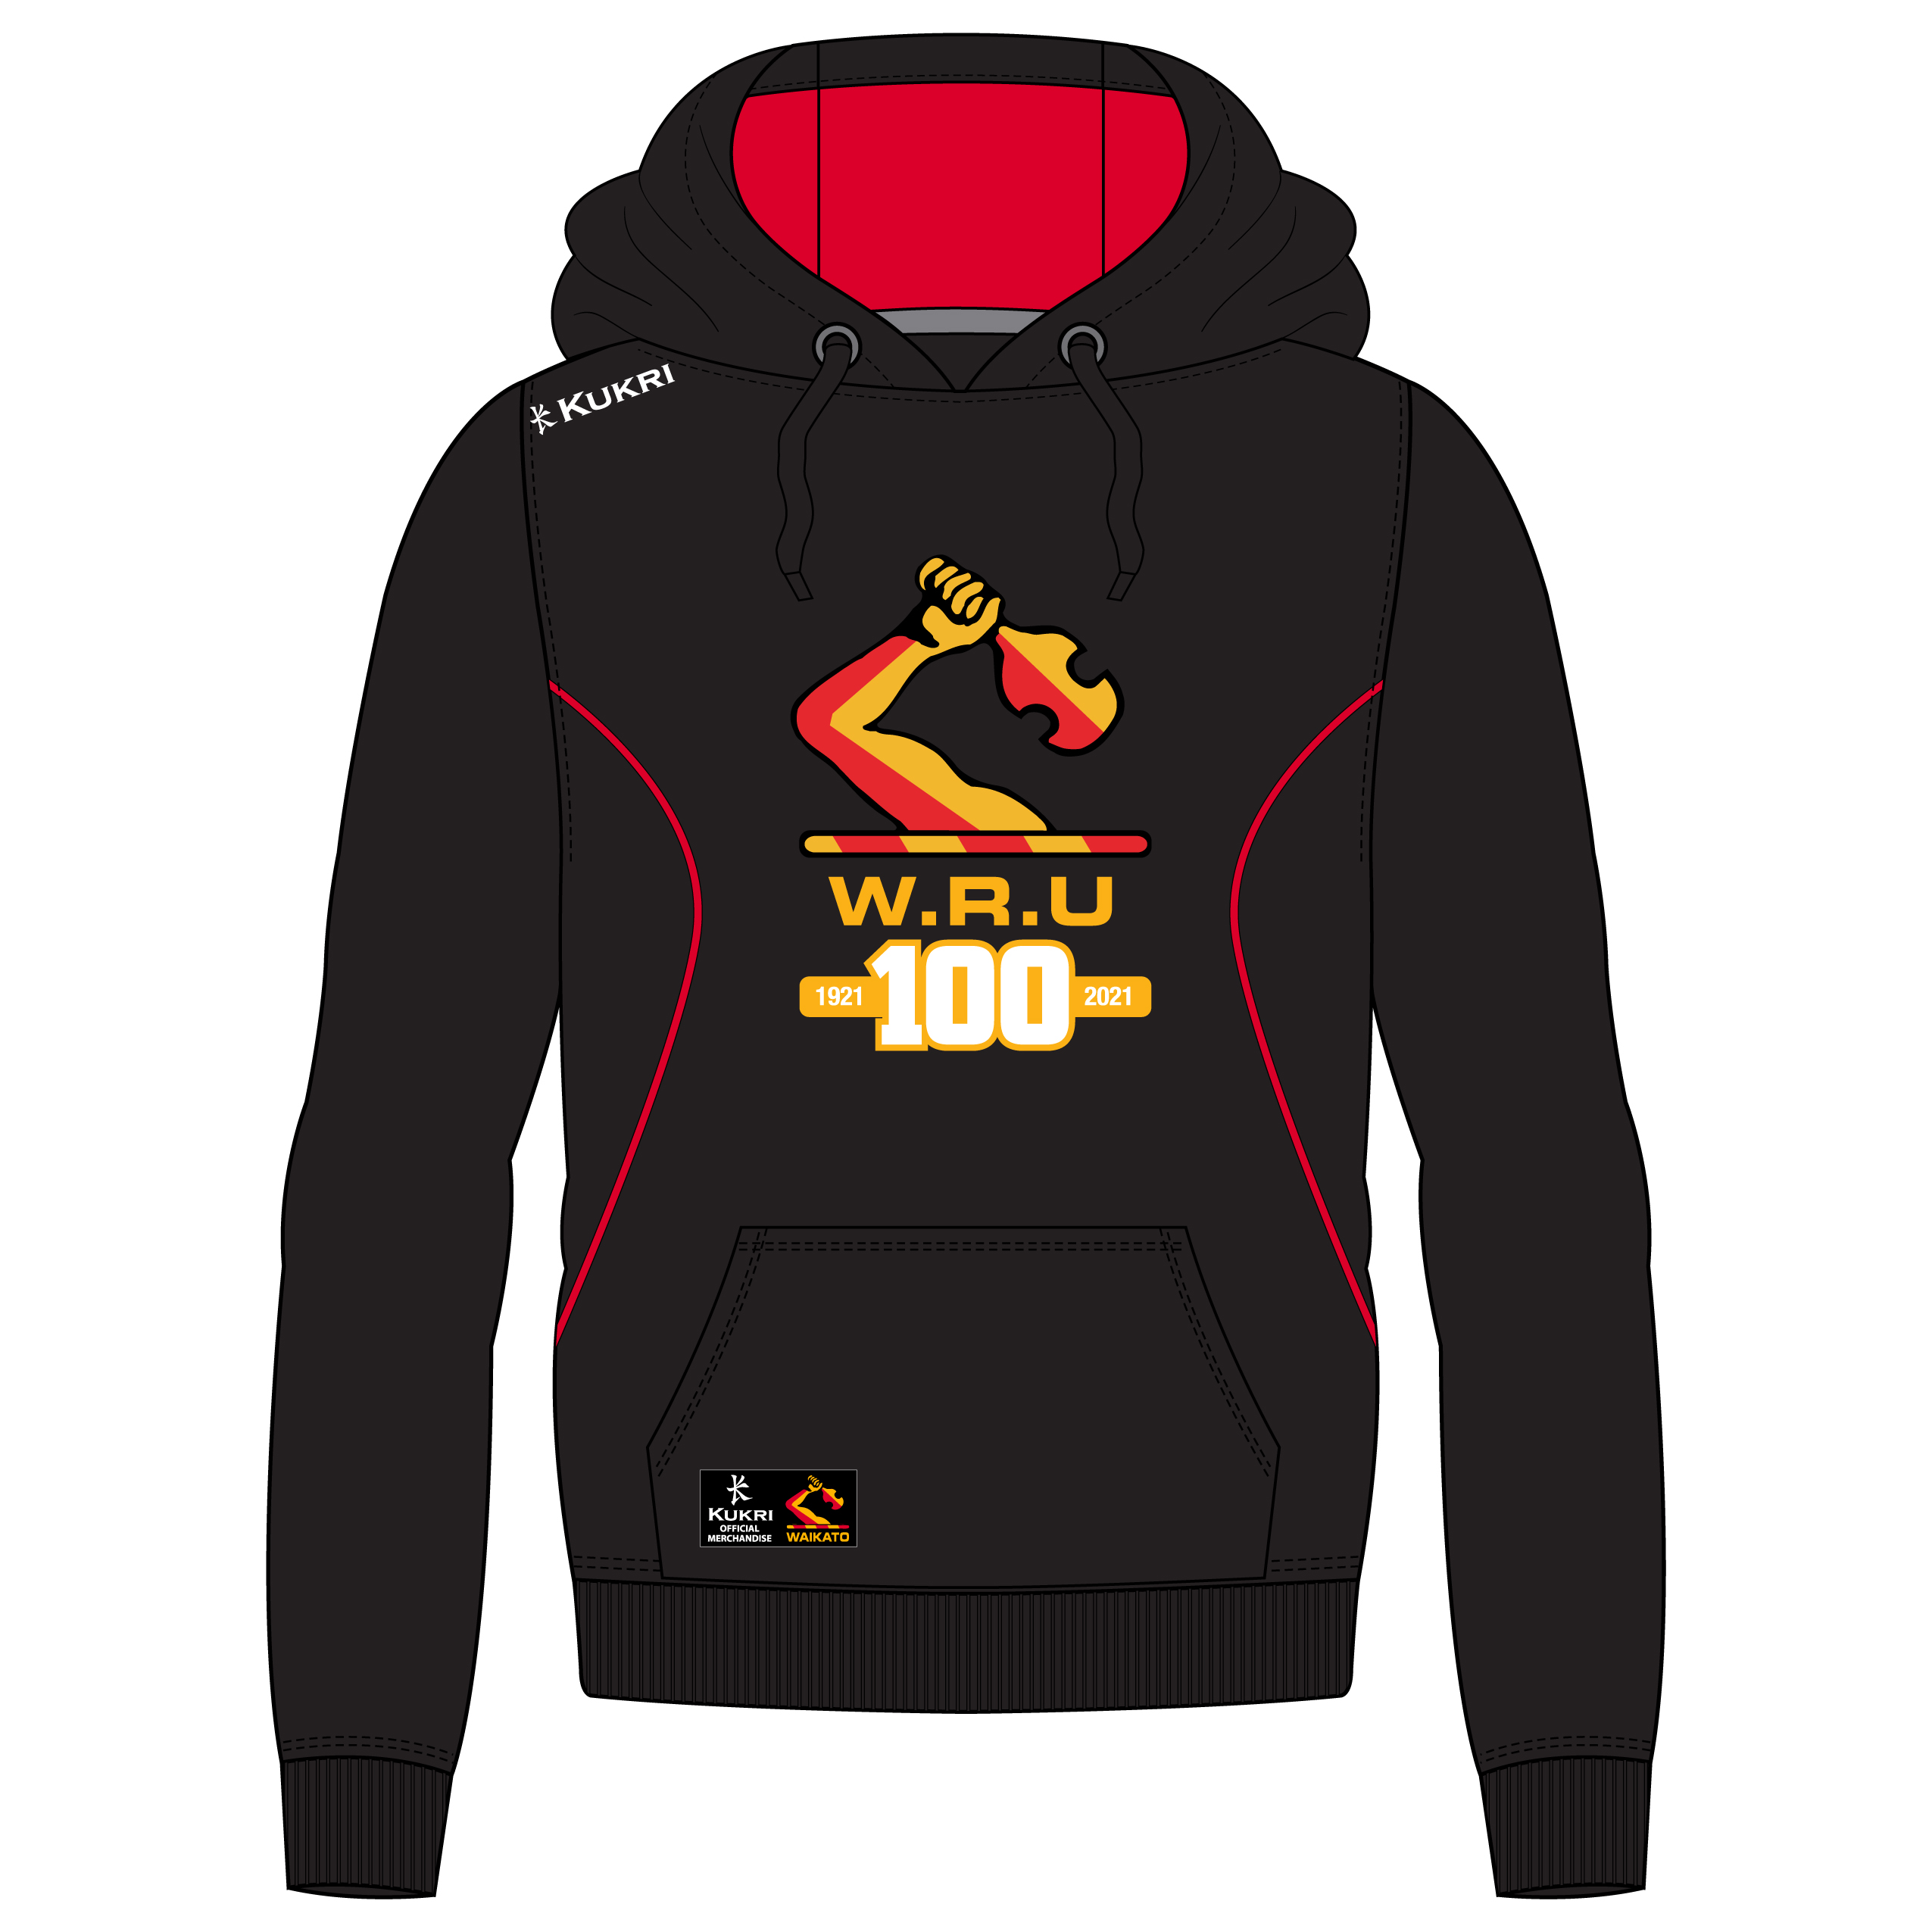 Waikato Rugby Online Shop Kukri Sports Product Details